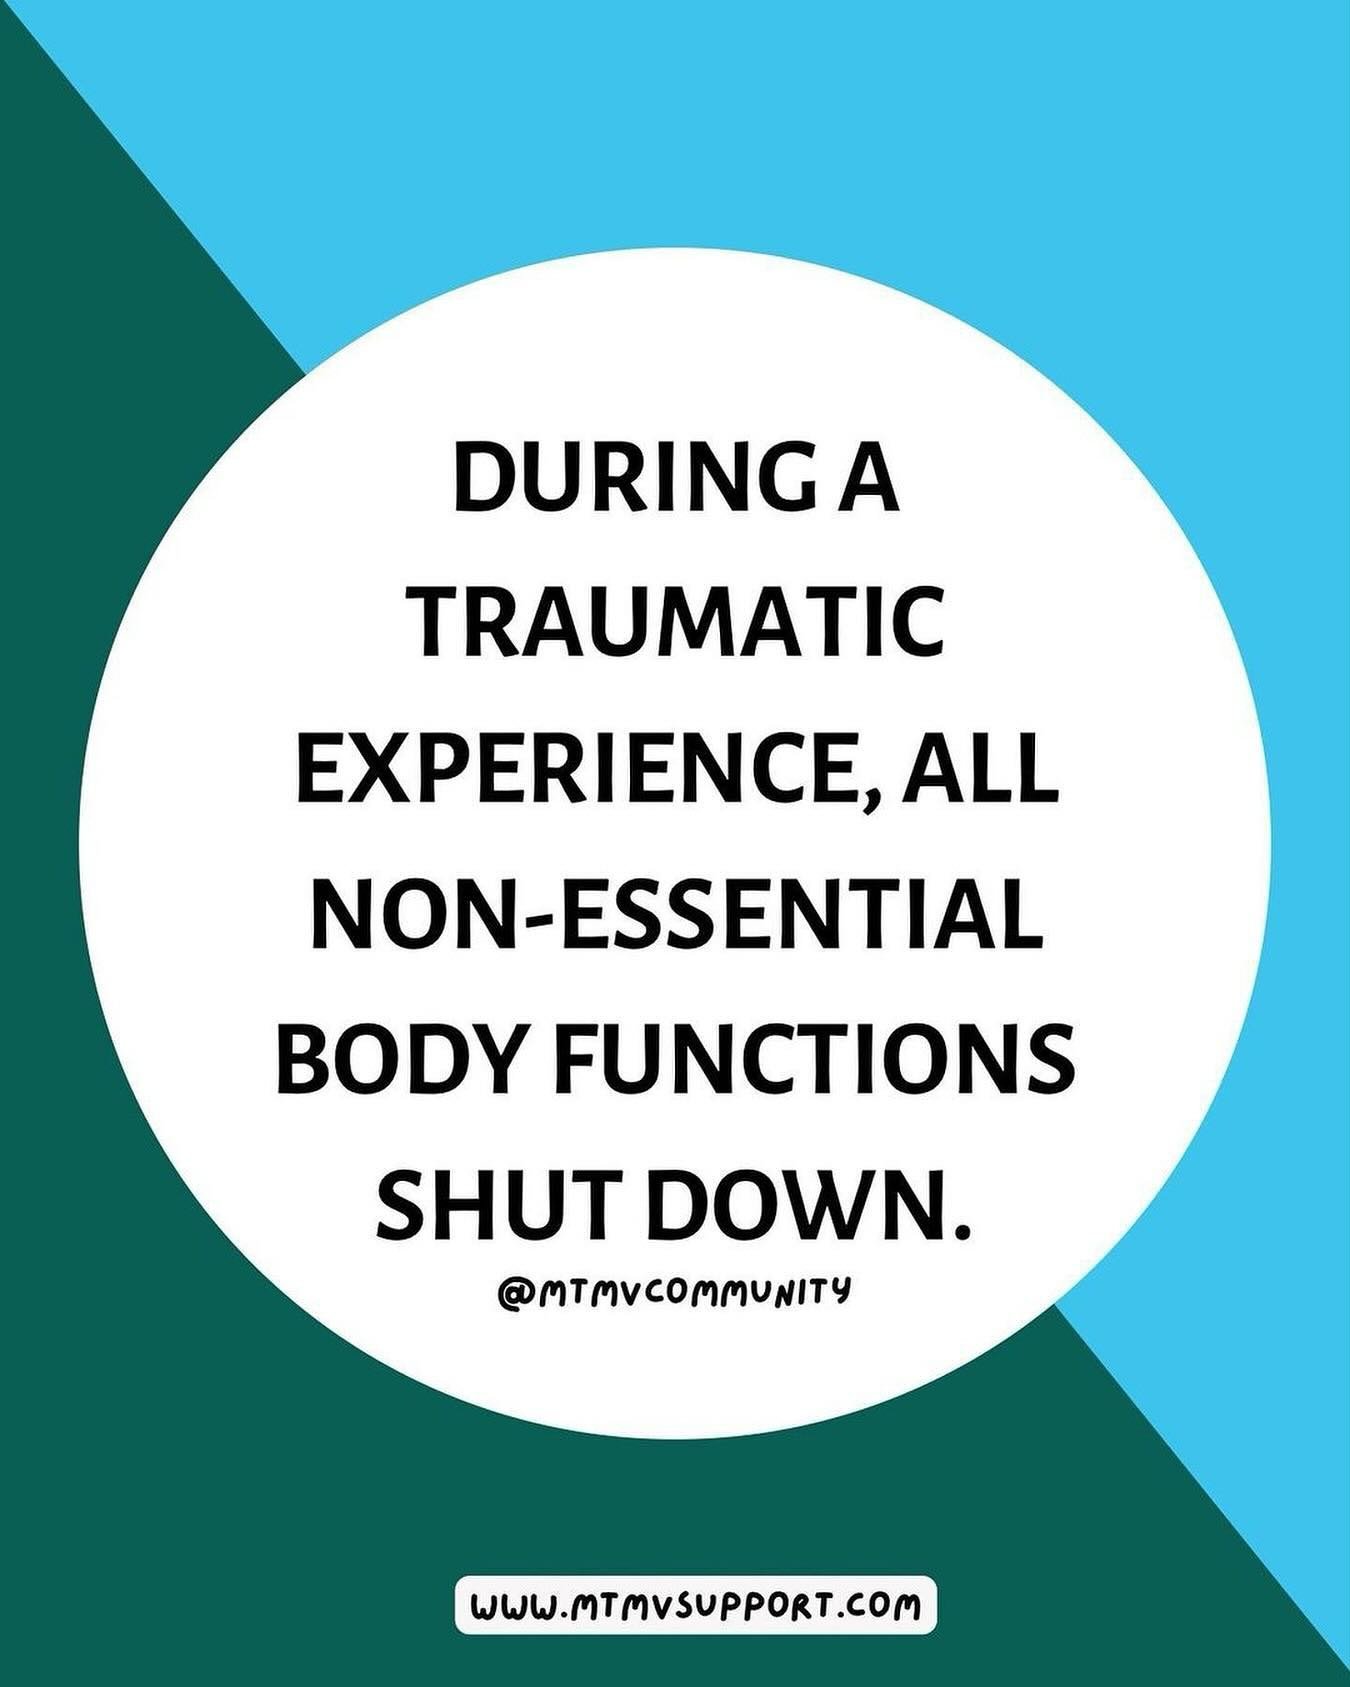 When we feel a threat to our survival, our body&rsquo;s natural reaction to danger is activated. Part of that chain reaction is the temporary pause of non-essential body functions to allow all your energy and resources to go towards immediate surviva